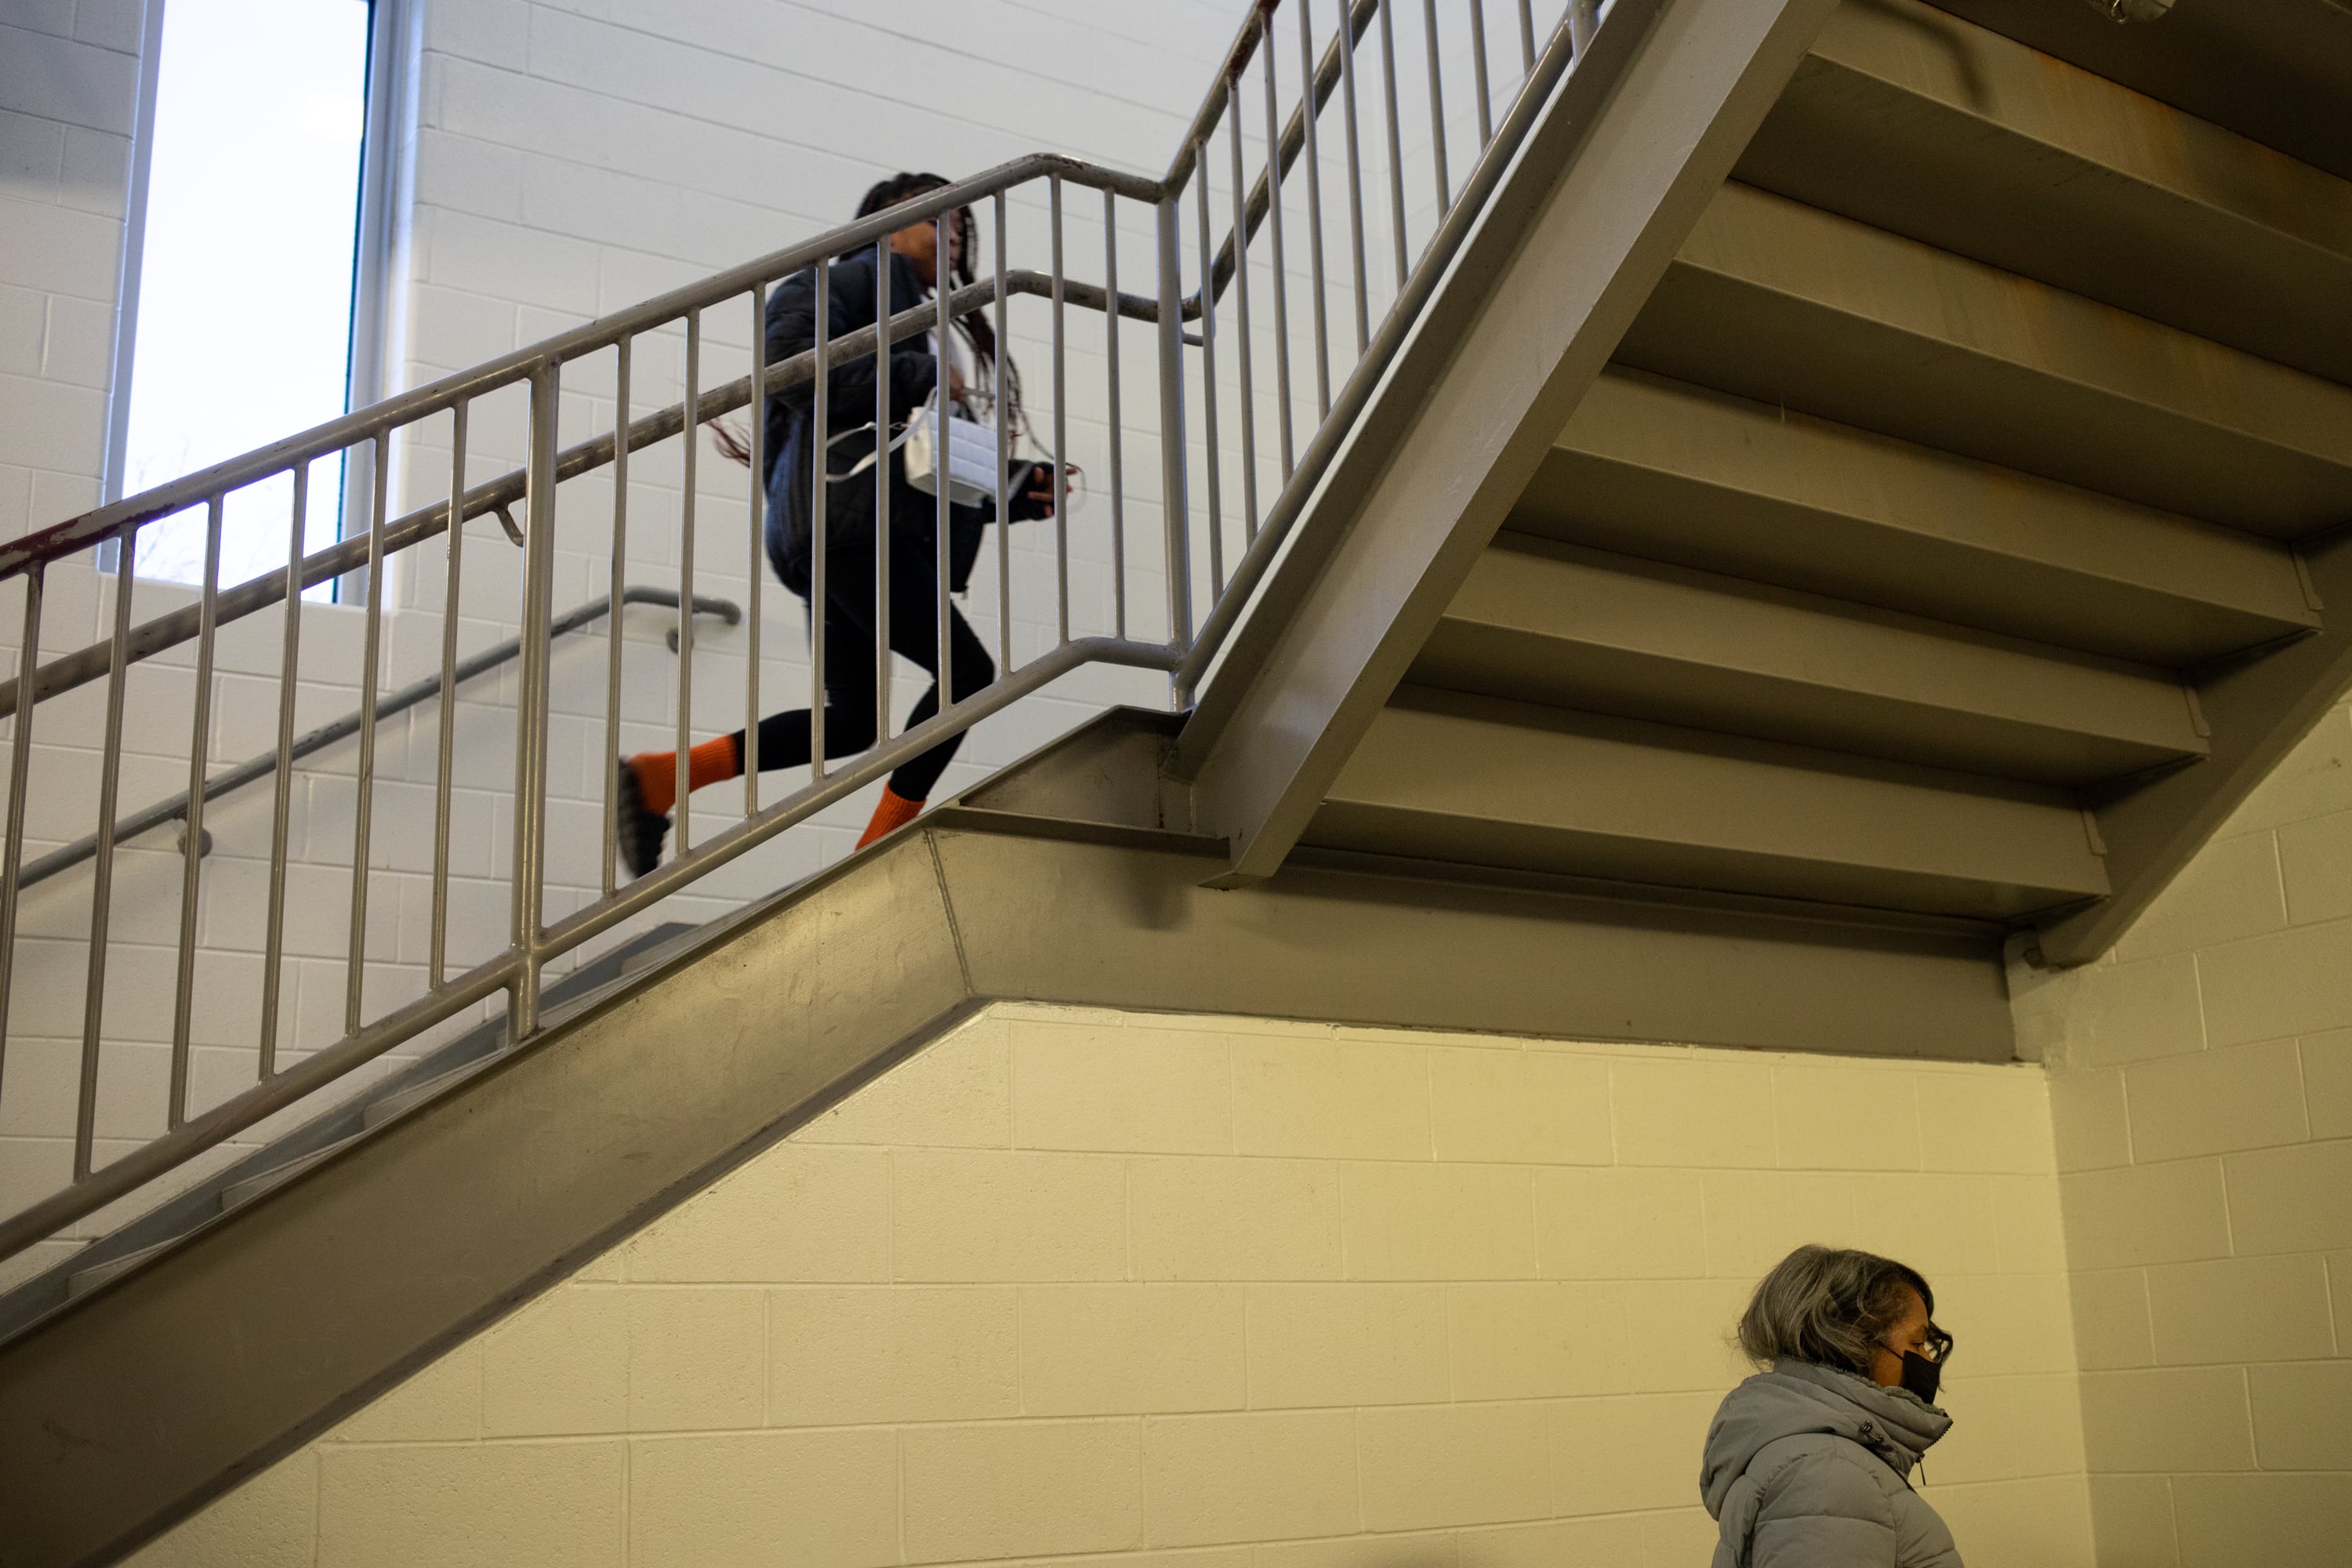 A student runs up the stairs while an adult is seen in a lower level.